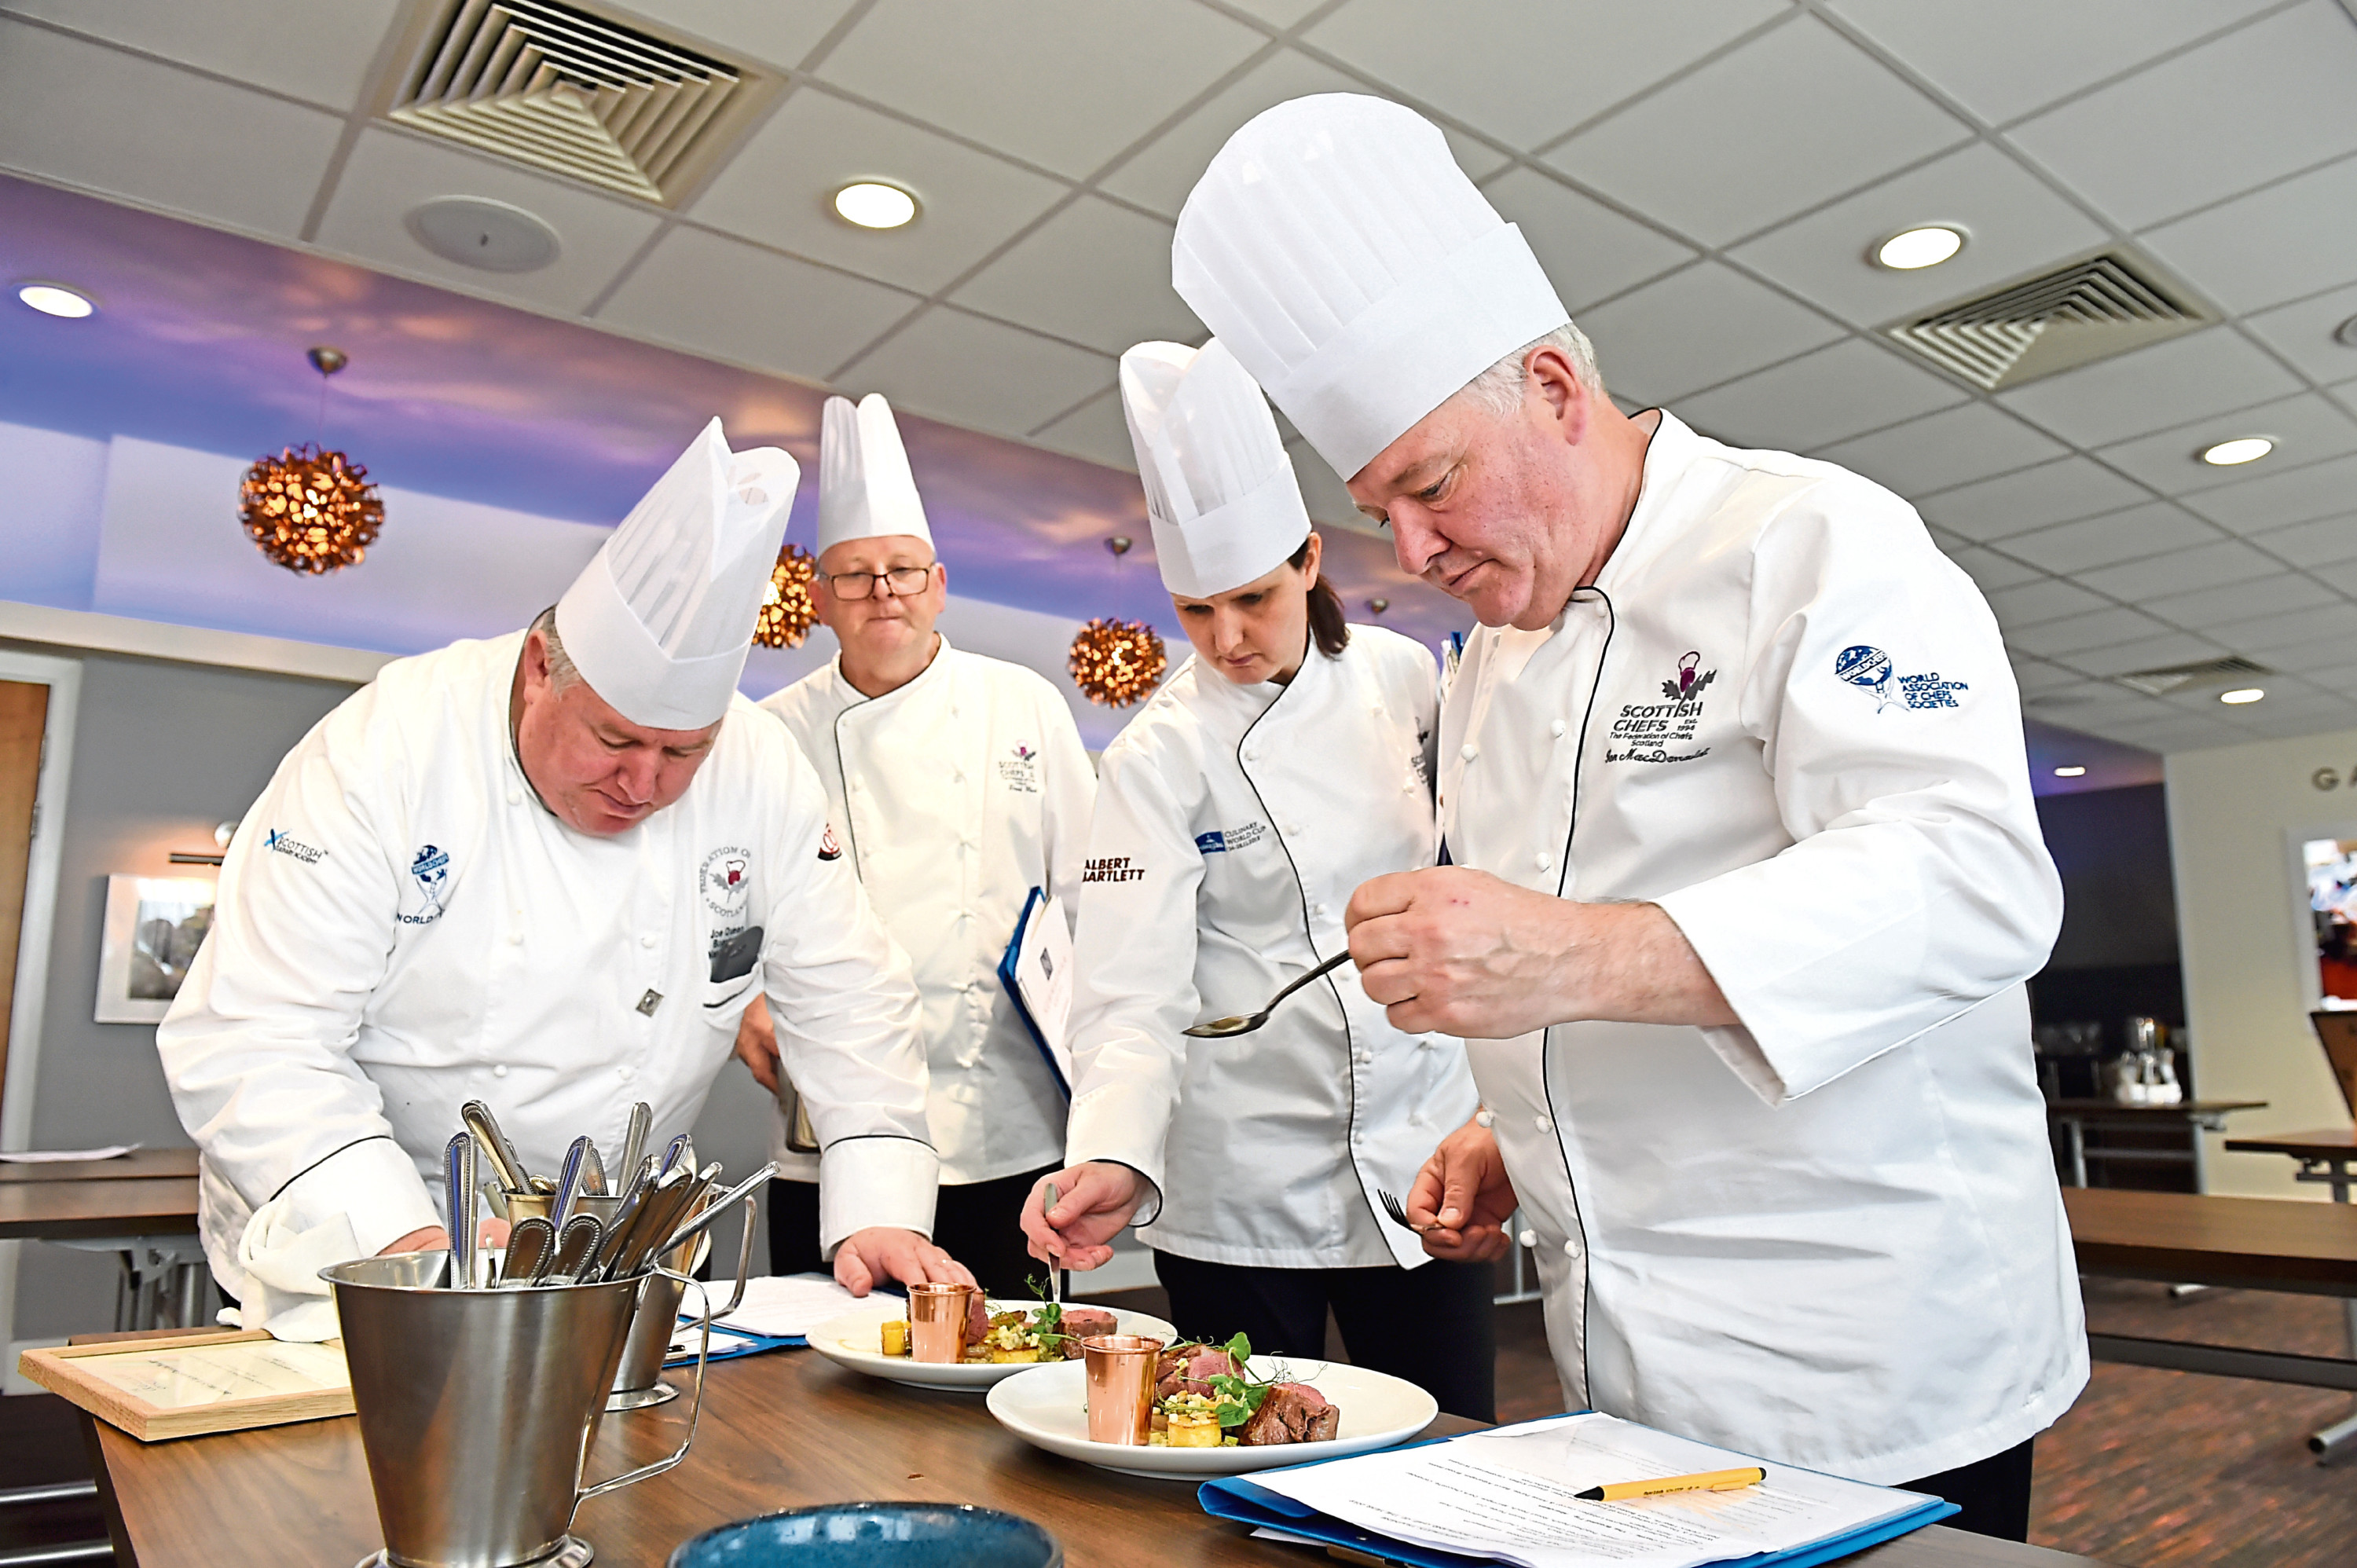 CR0009538
North East of Scotland Chef and Restaurant of the Year 2019 cook-off at North East Scotland College, Gallogate.

Picture by KENNY ELRICK     27/05/2019